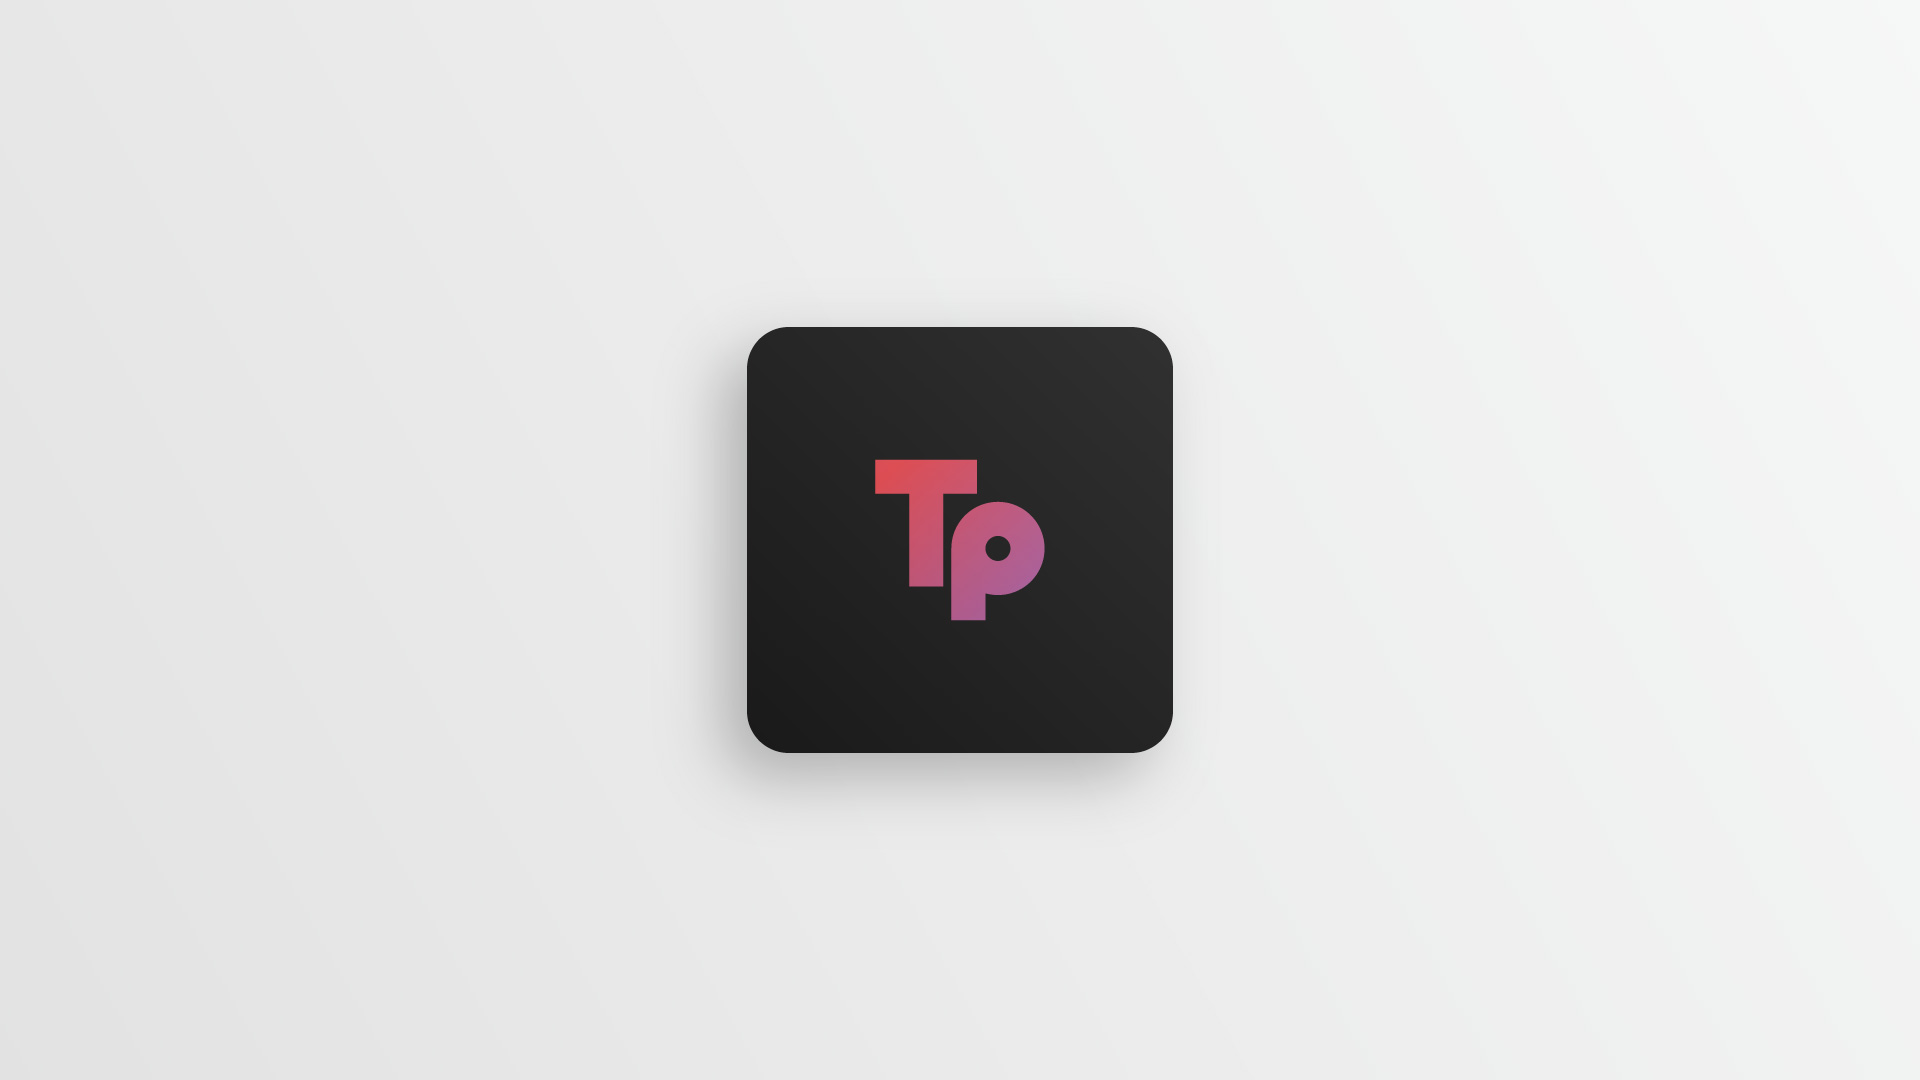 Logo redesign for Teleparty during the transition from Netflix Party